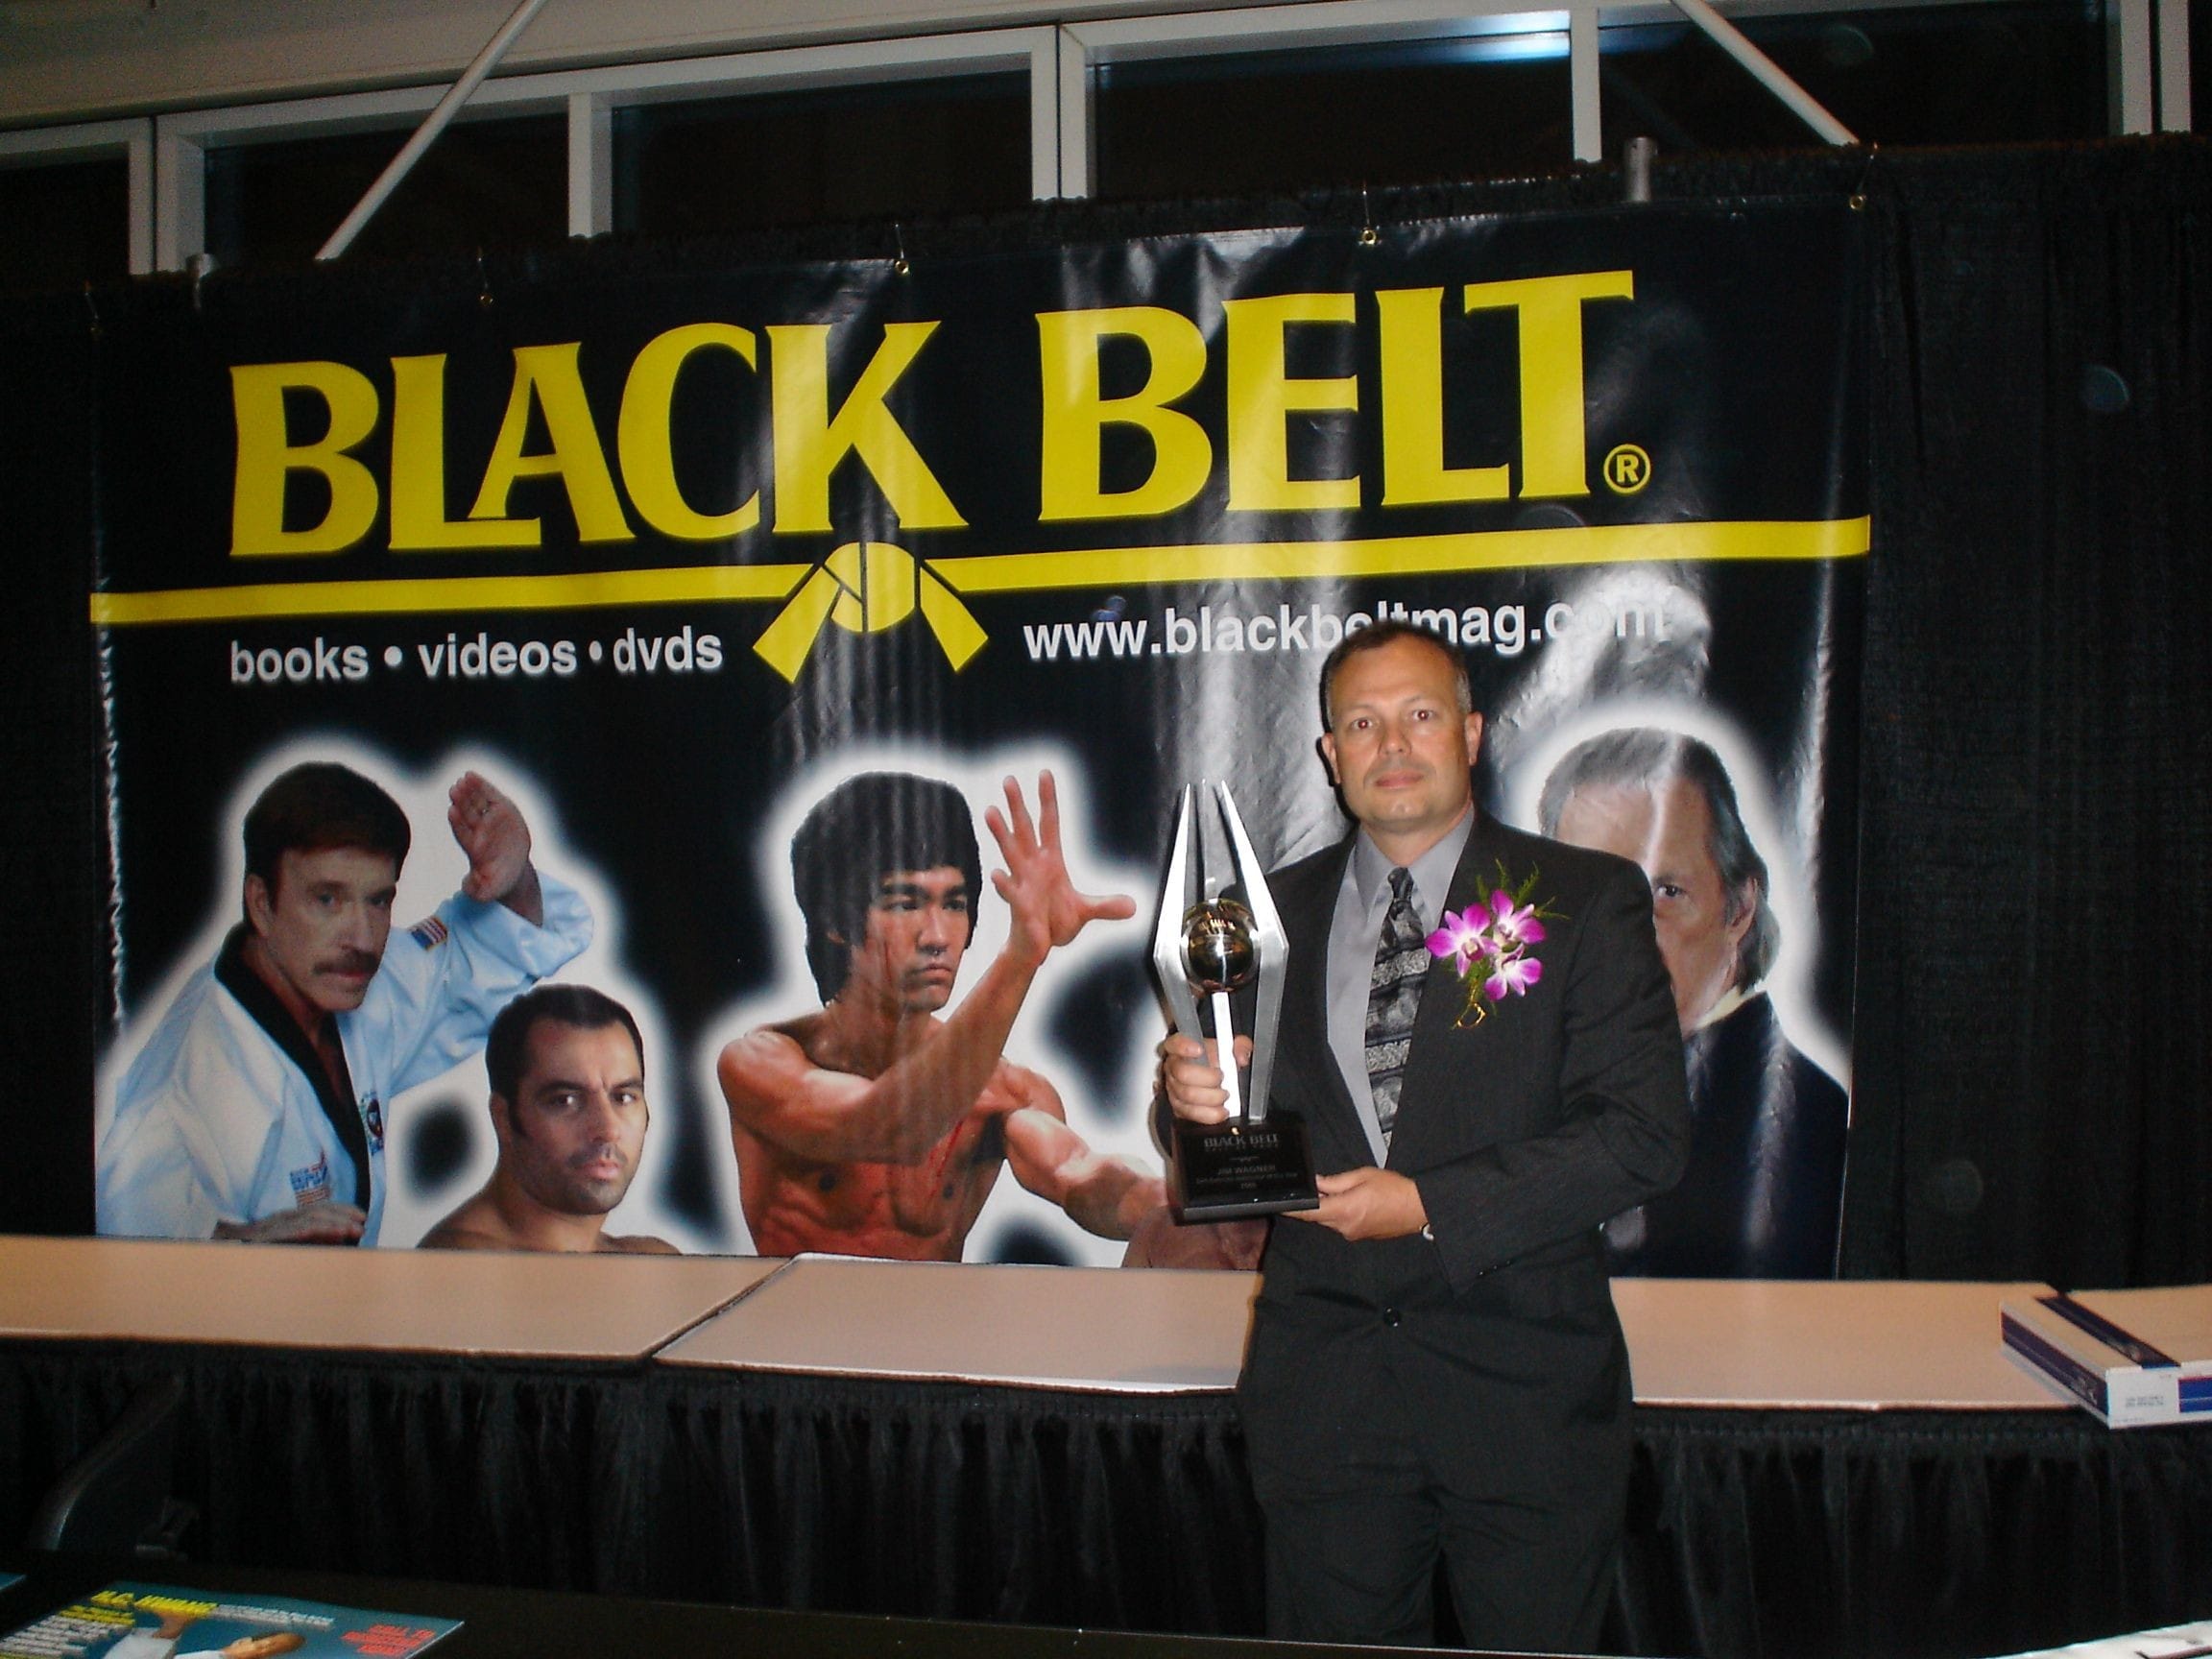 In this photo Jim holds up his trophy awarded to him from Black Belt Magazine for Self-Defense Instructor of the Year 2006. He has received several such awards.